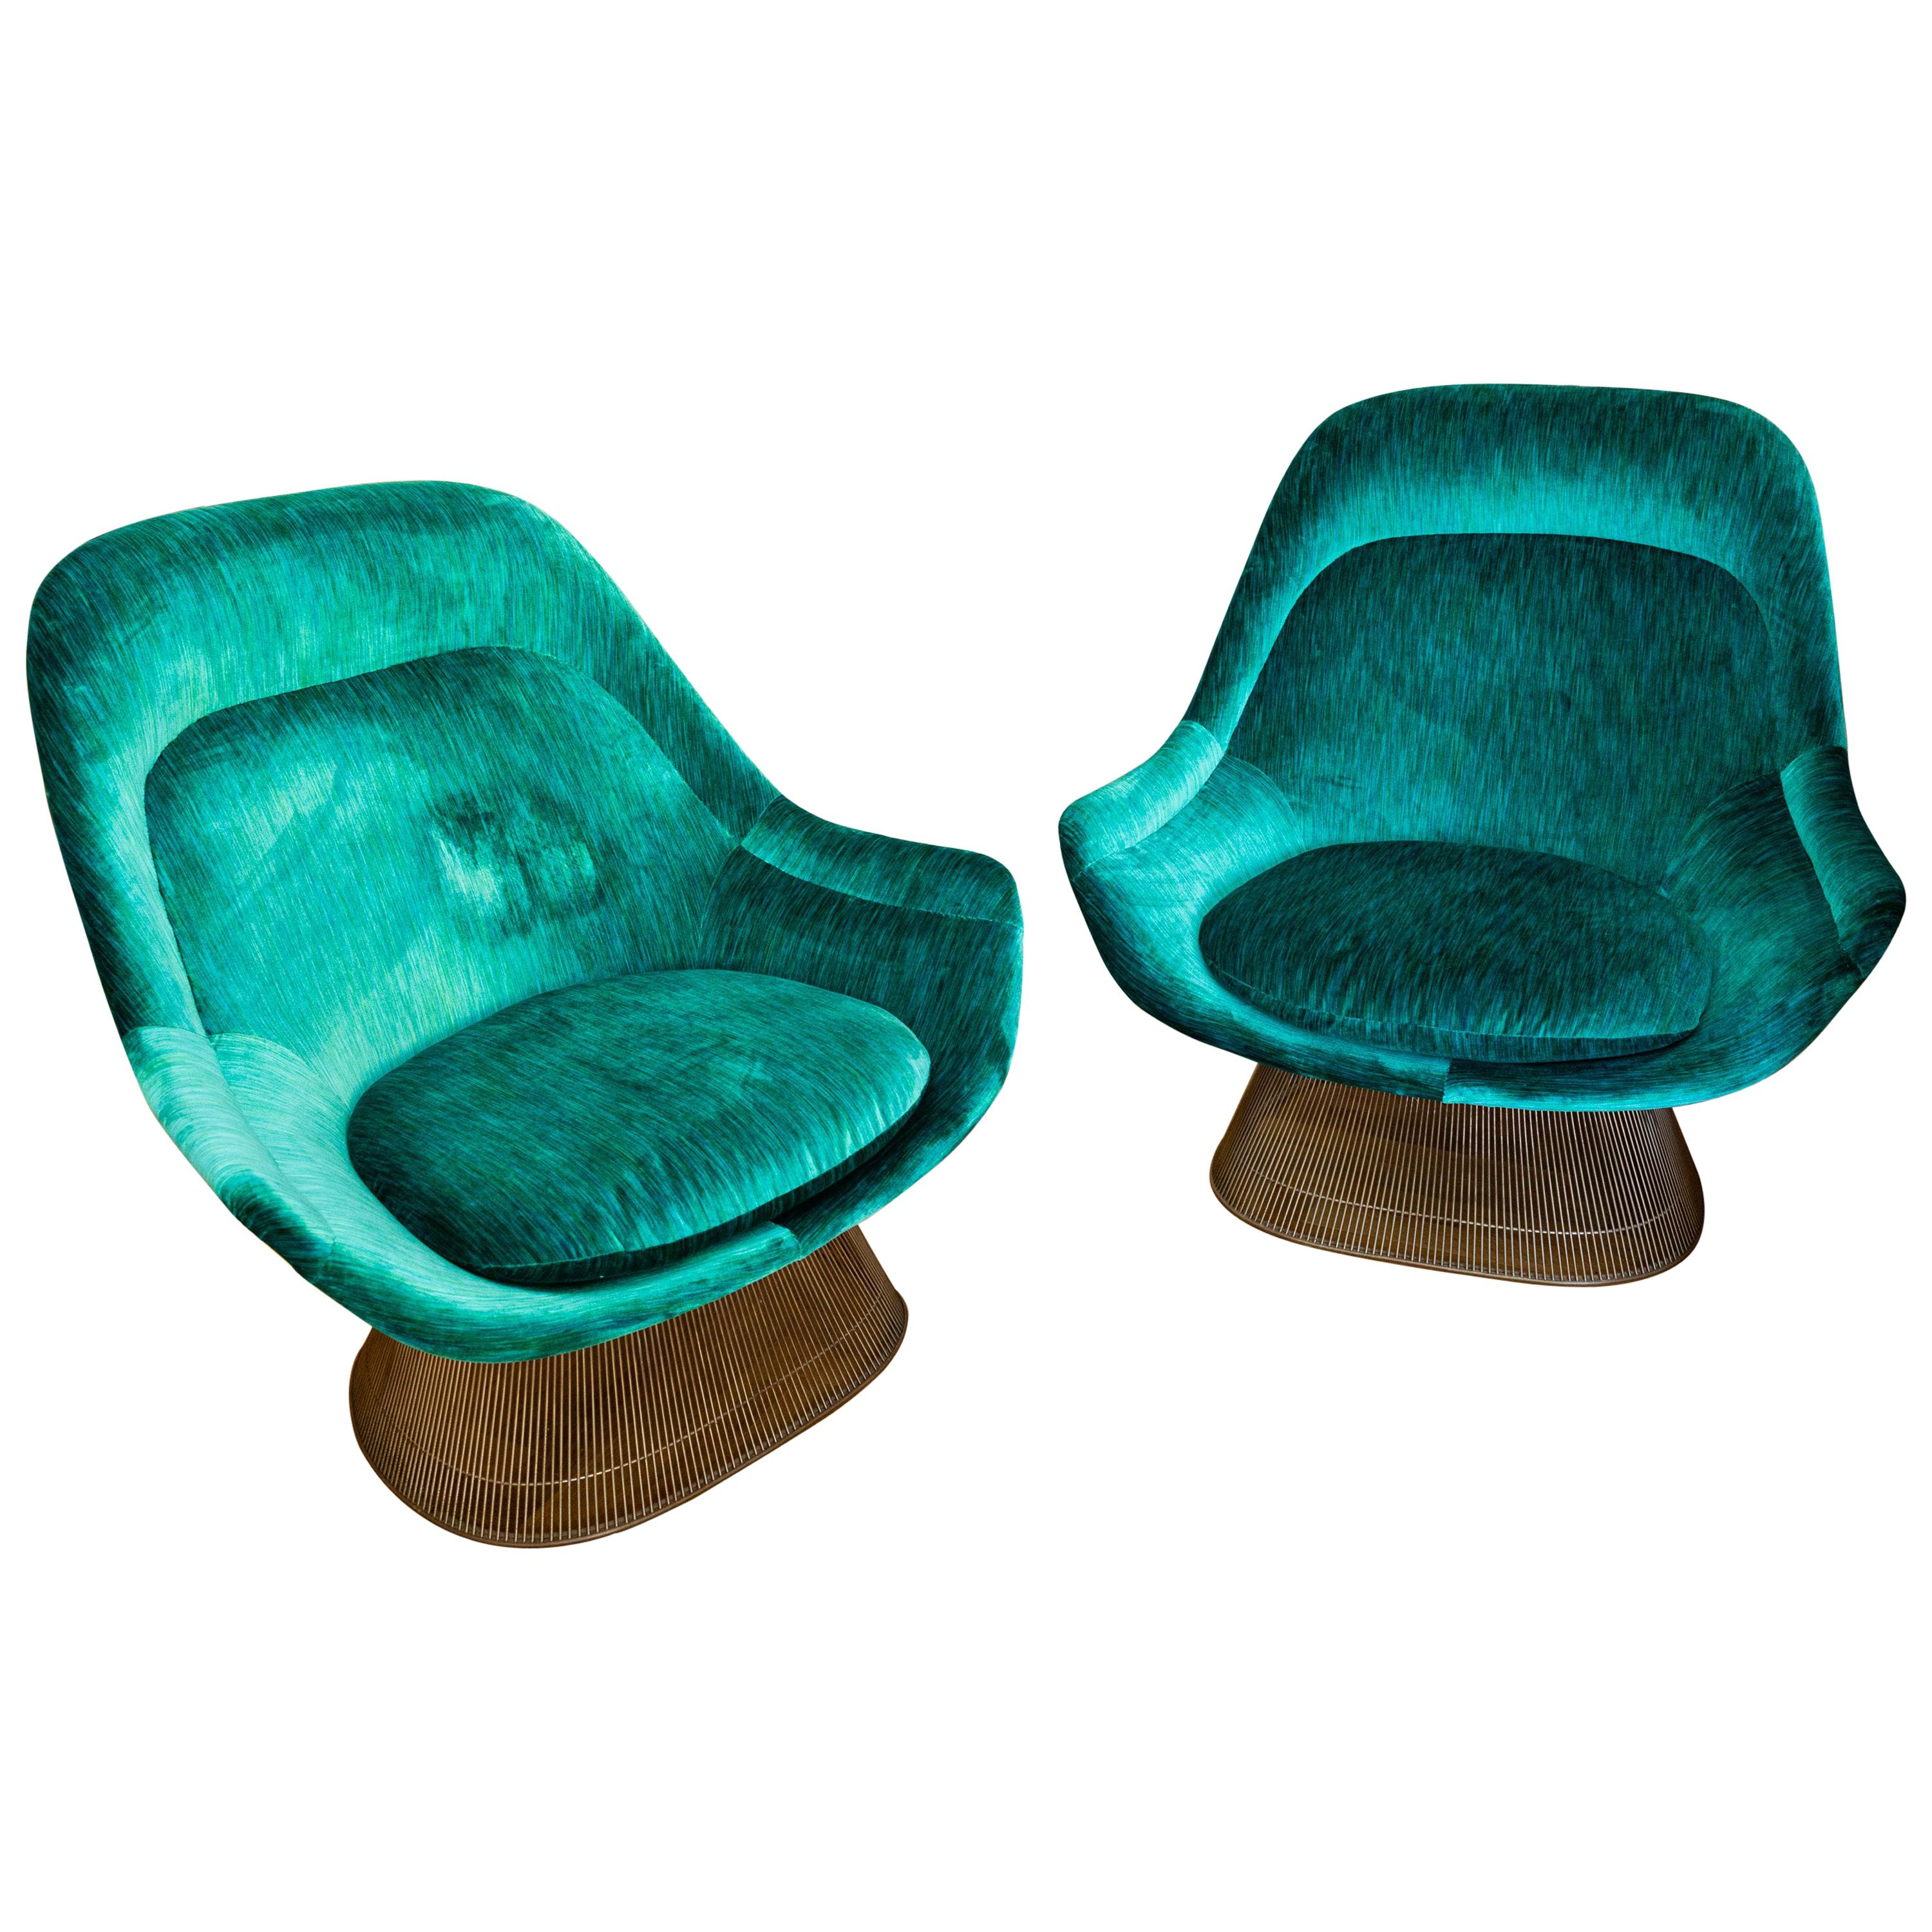 Pair of Easy Chairs by Warren Platner for Knoll, circa 1970